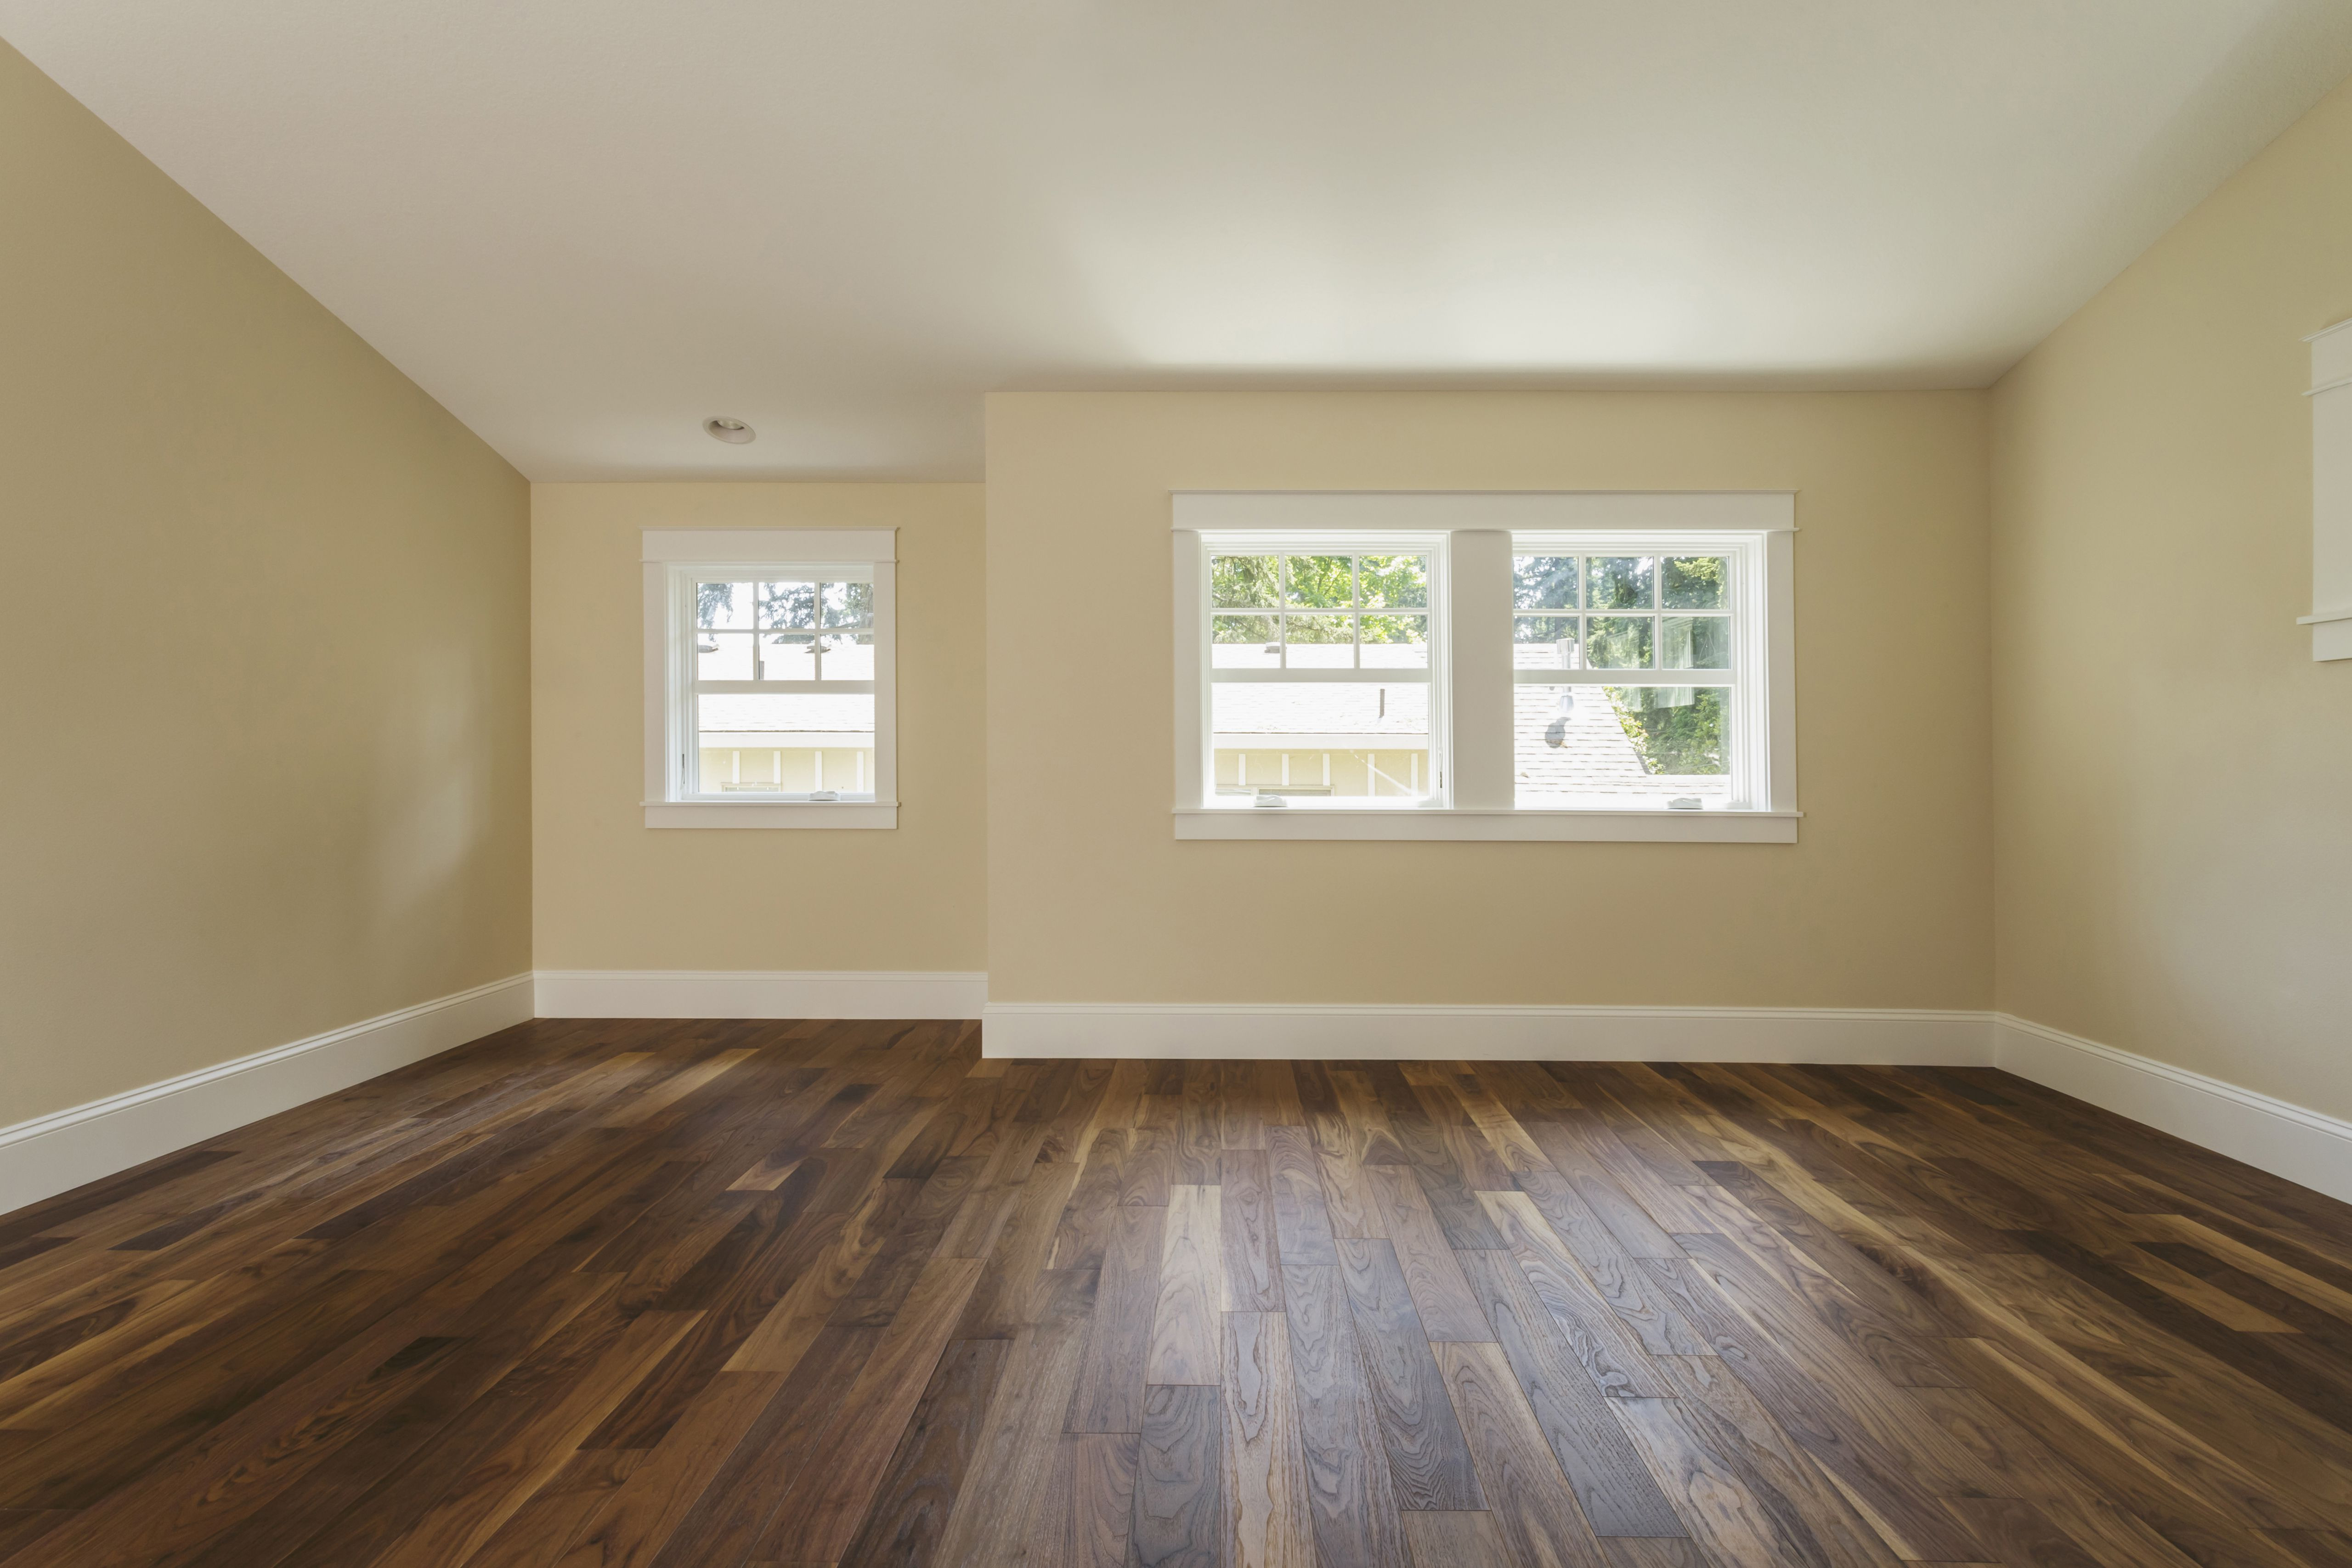 hardwood flooring edge types of its easy and fast to install plank vinyl flooring with regard to wooden floor in empty bedroom 482143001 588bd5f45f9b5874eebd56e9